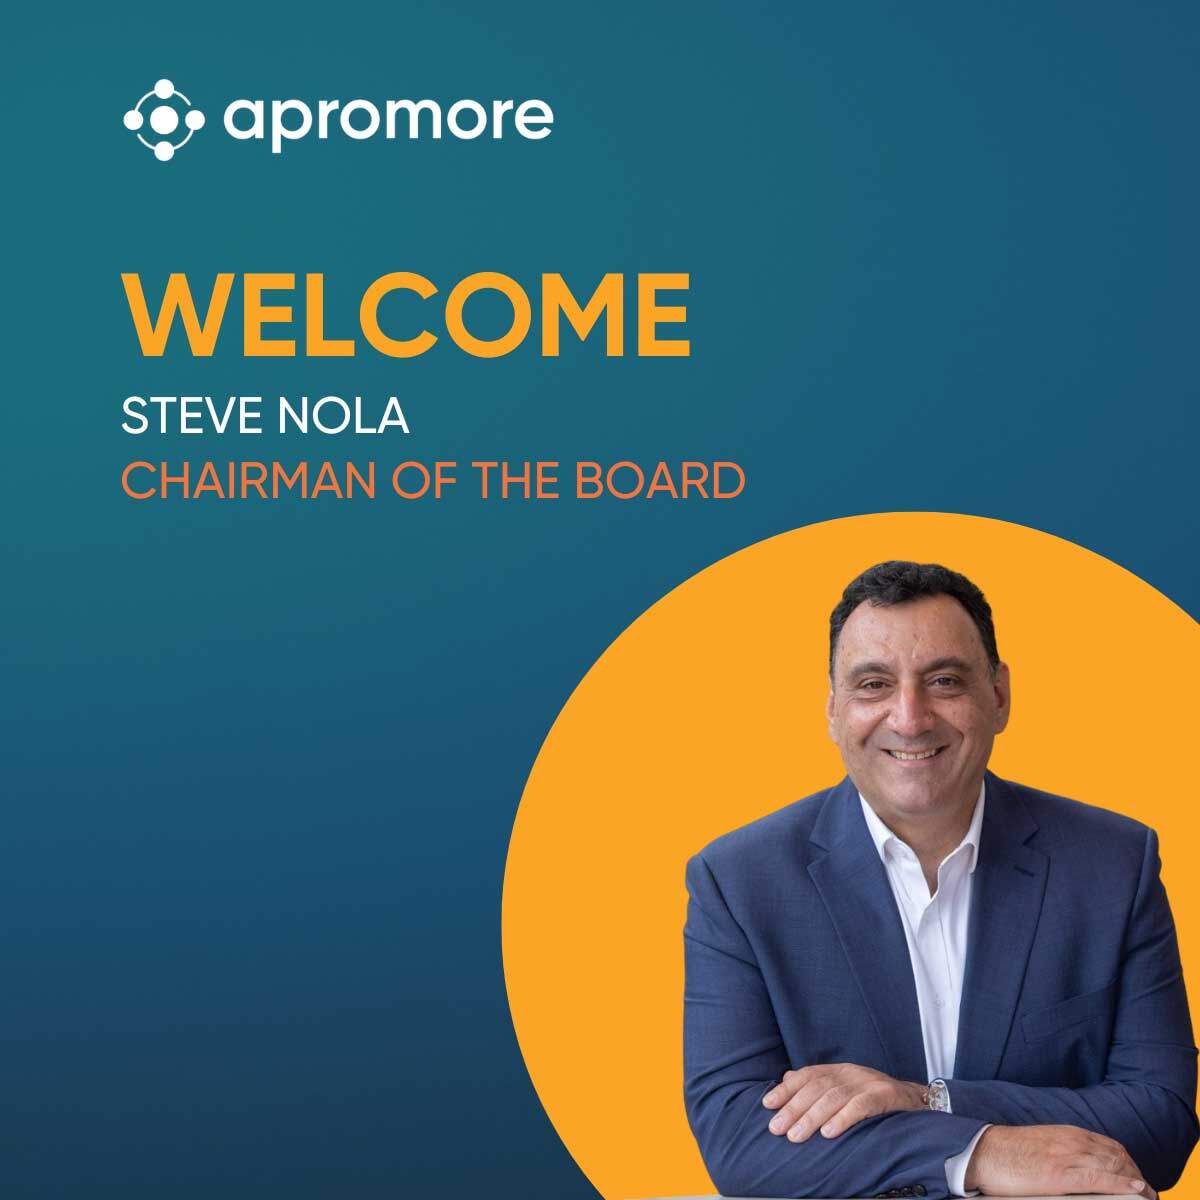 Apromore Names Steve Nola Chairman of the Board